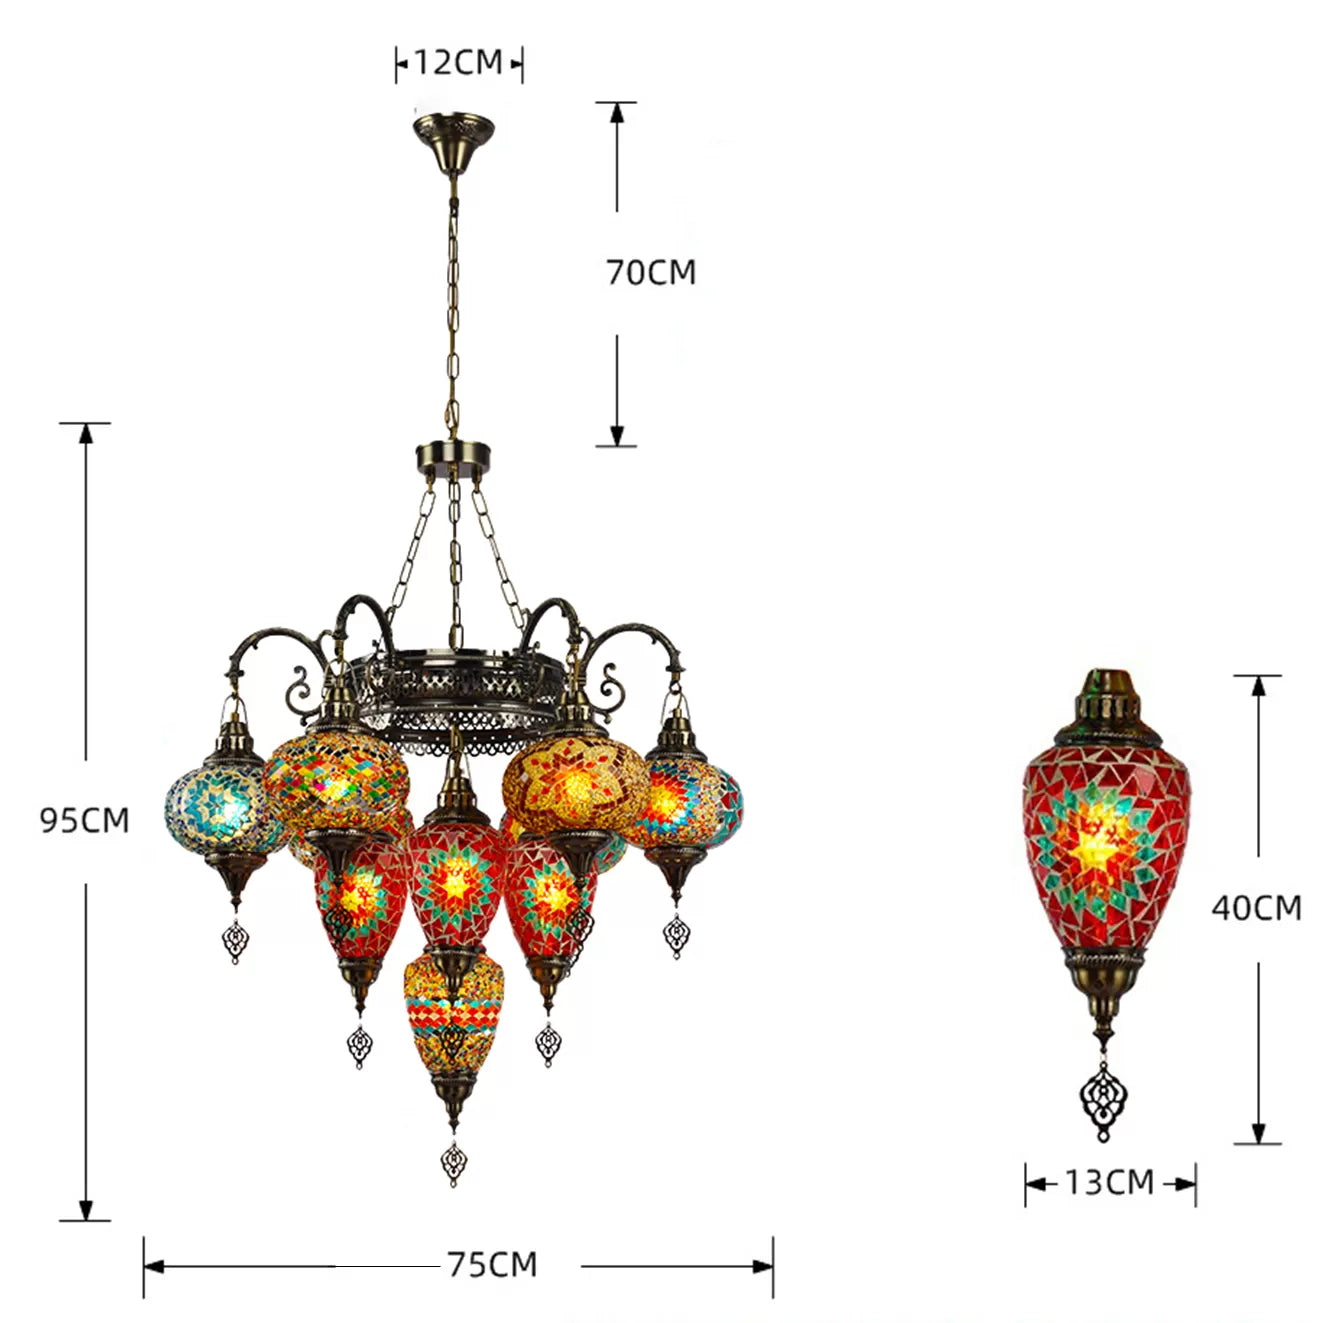 handmade-bohemian-style-ceiling-chandelier-nightingale-lamp-handcrafted-home-decor-multi-colour-beautiful-elegant-metal-glass-large-size-landing-area